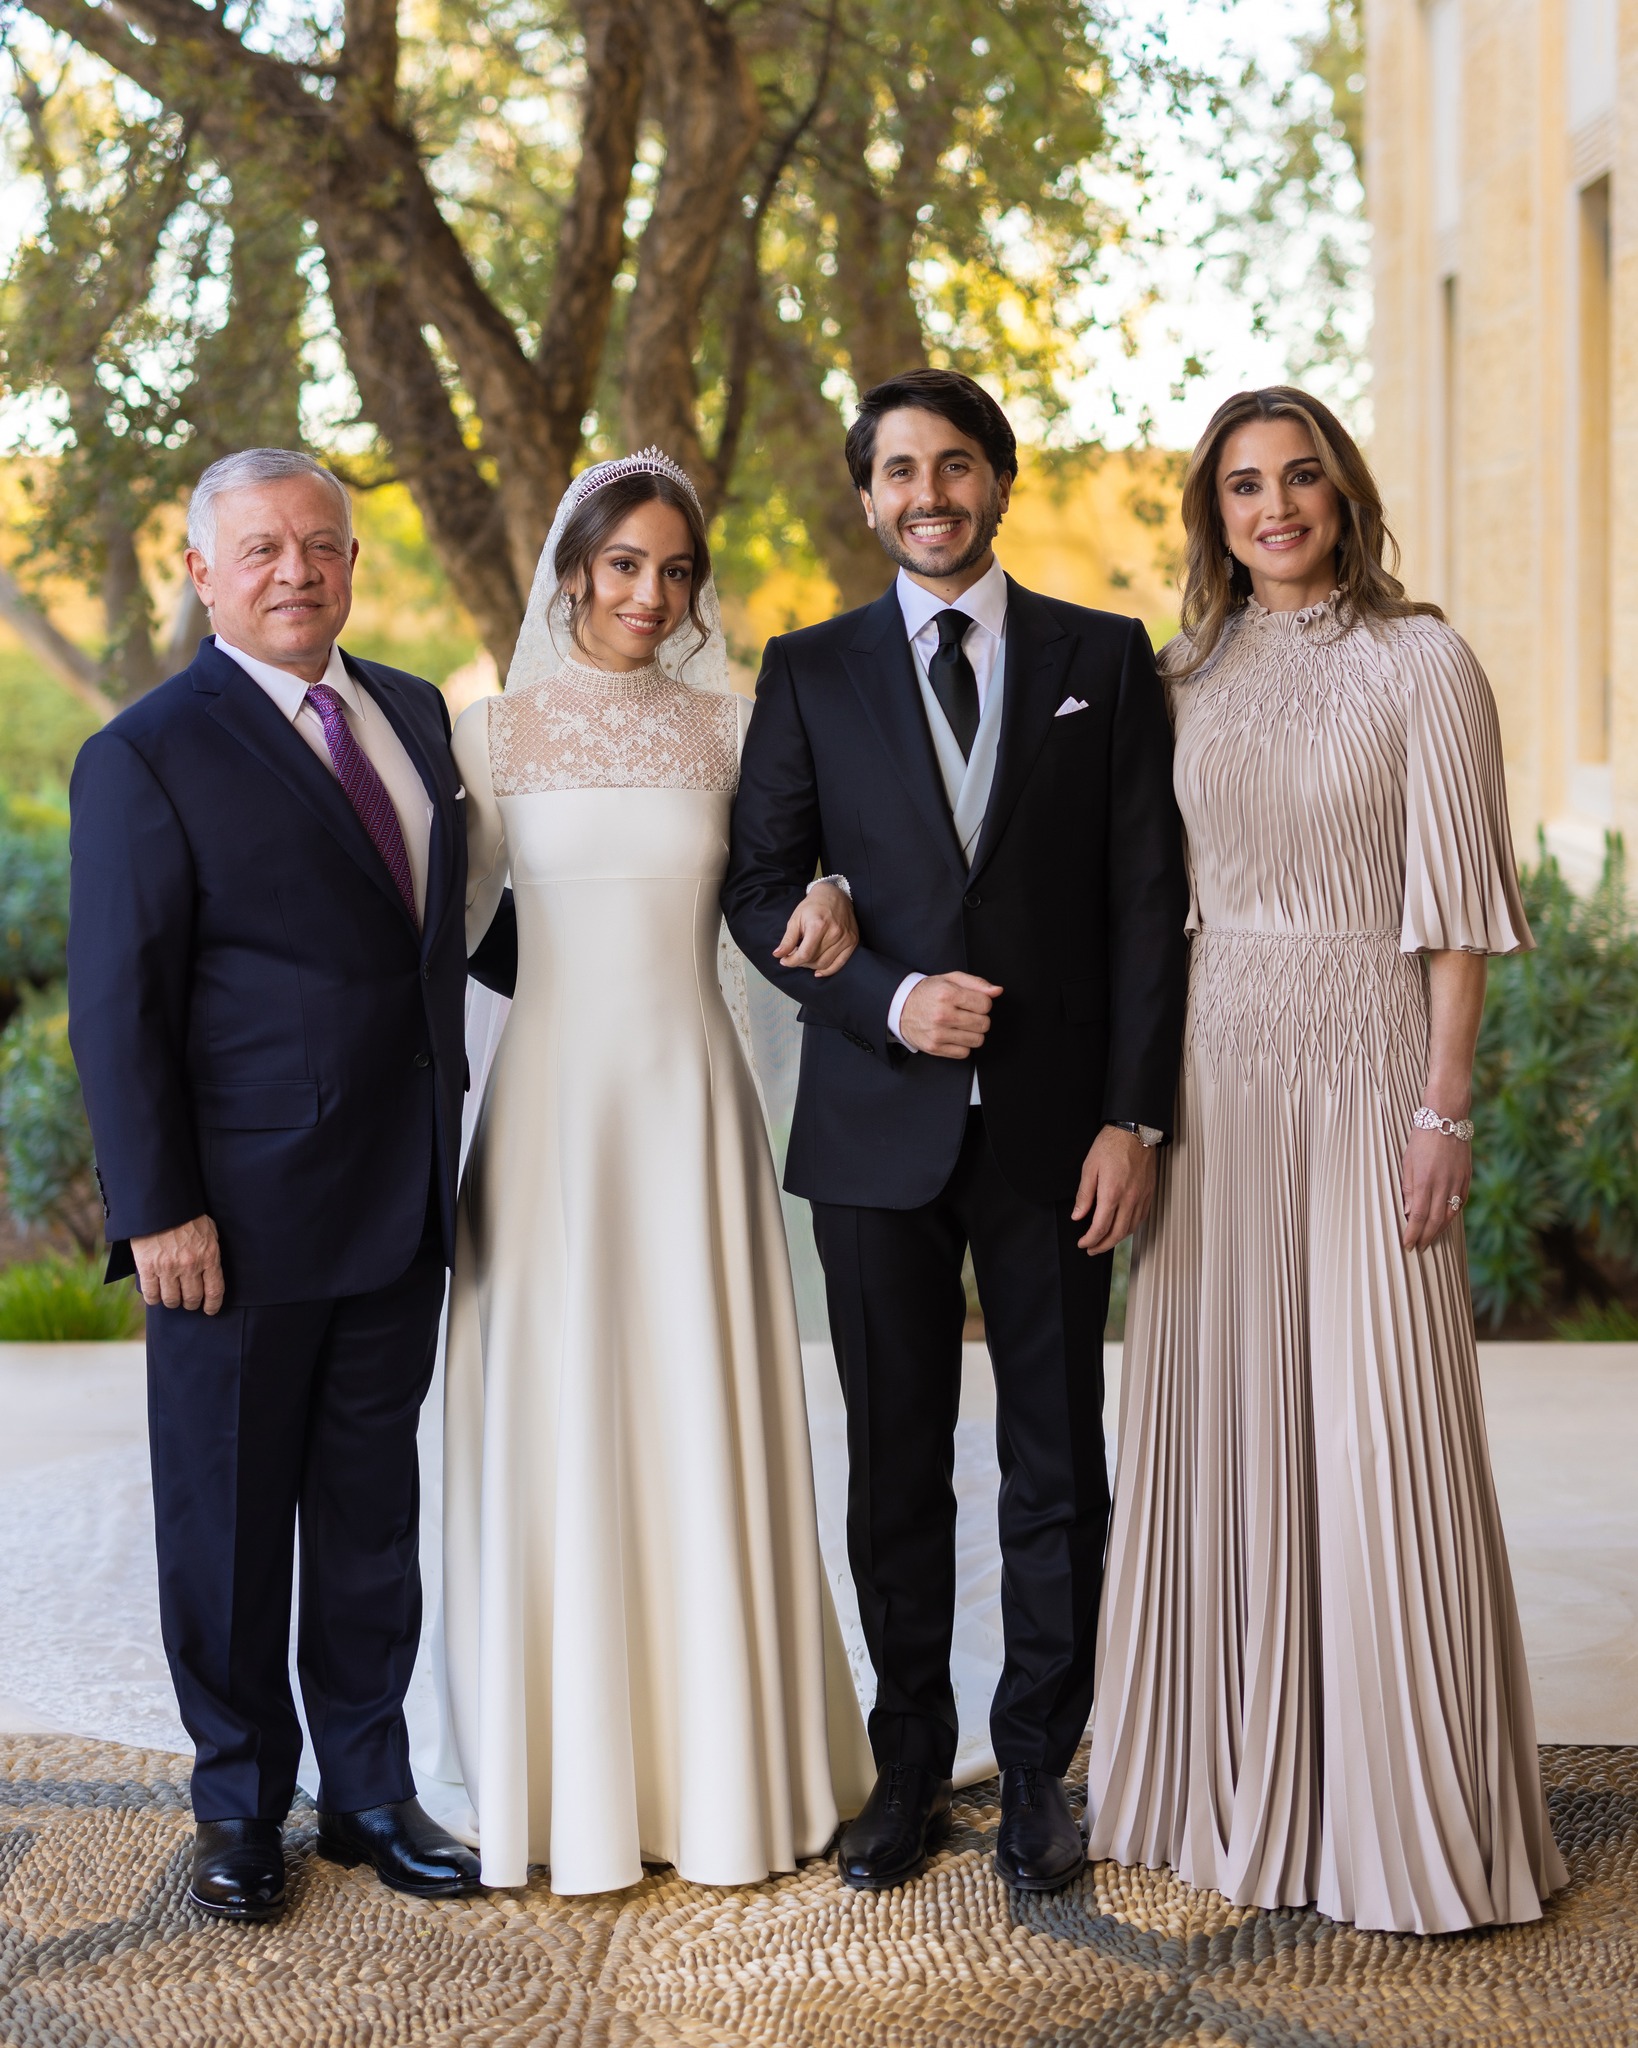 The wedding was hosted at the official residence of King and Queen Beit Al Jordan Palace and was attended by close 150 family, friends and relatives.